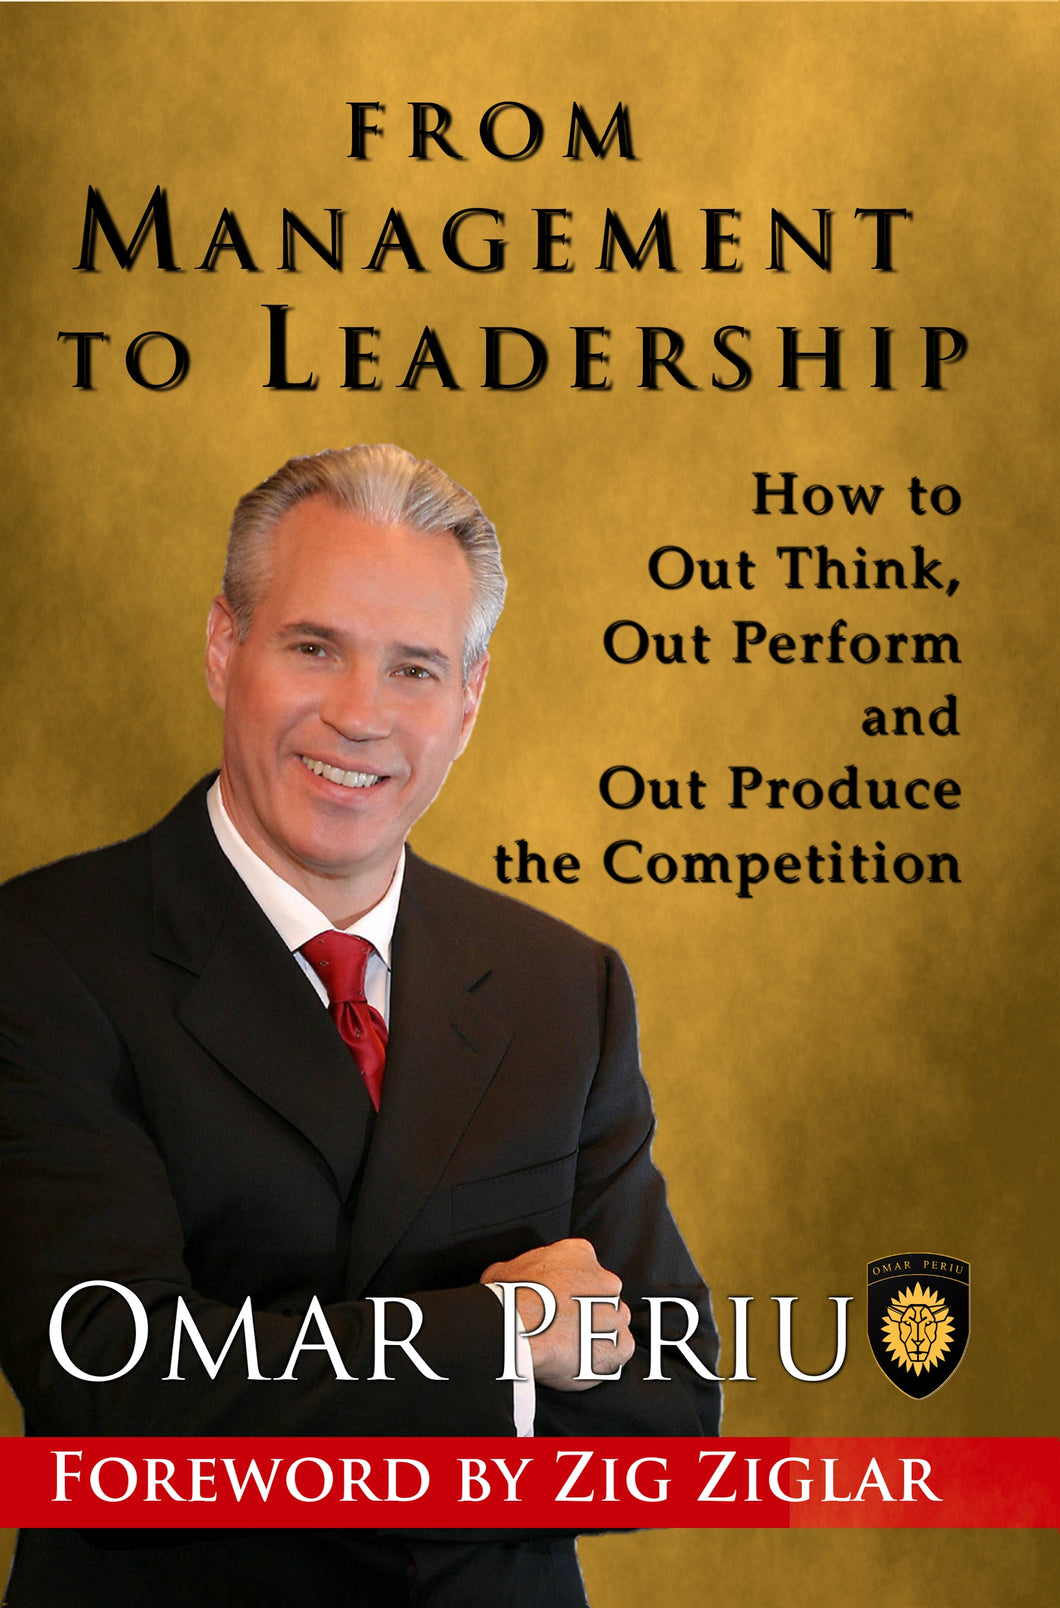 FROM MANAGEMENT TO LEADERSHIP  by Omar Periu